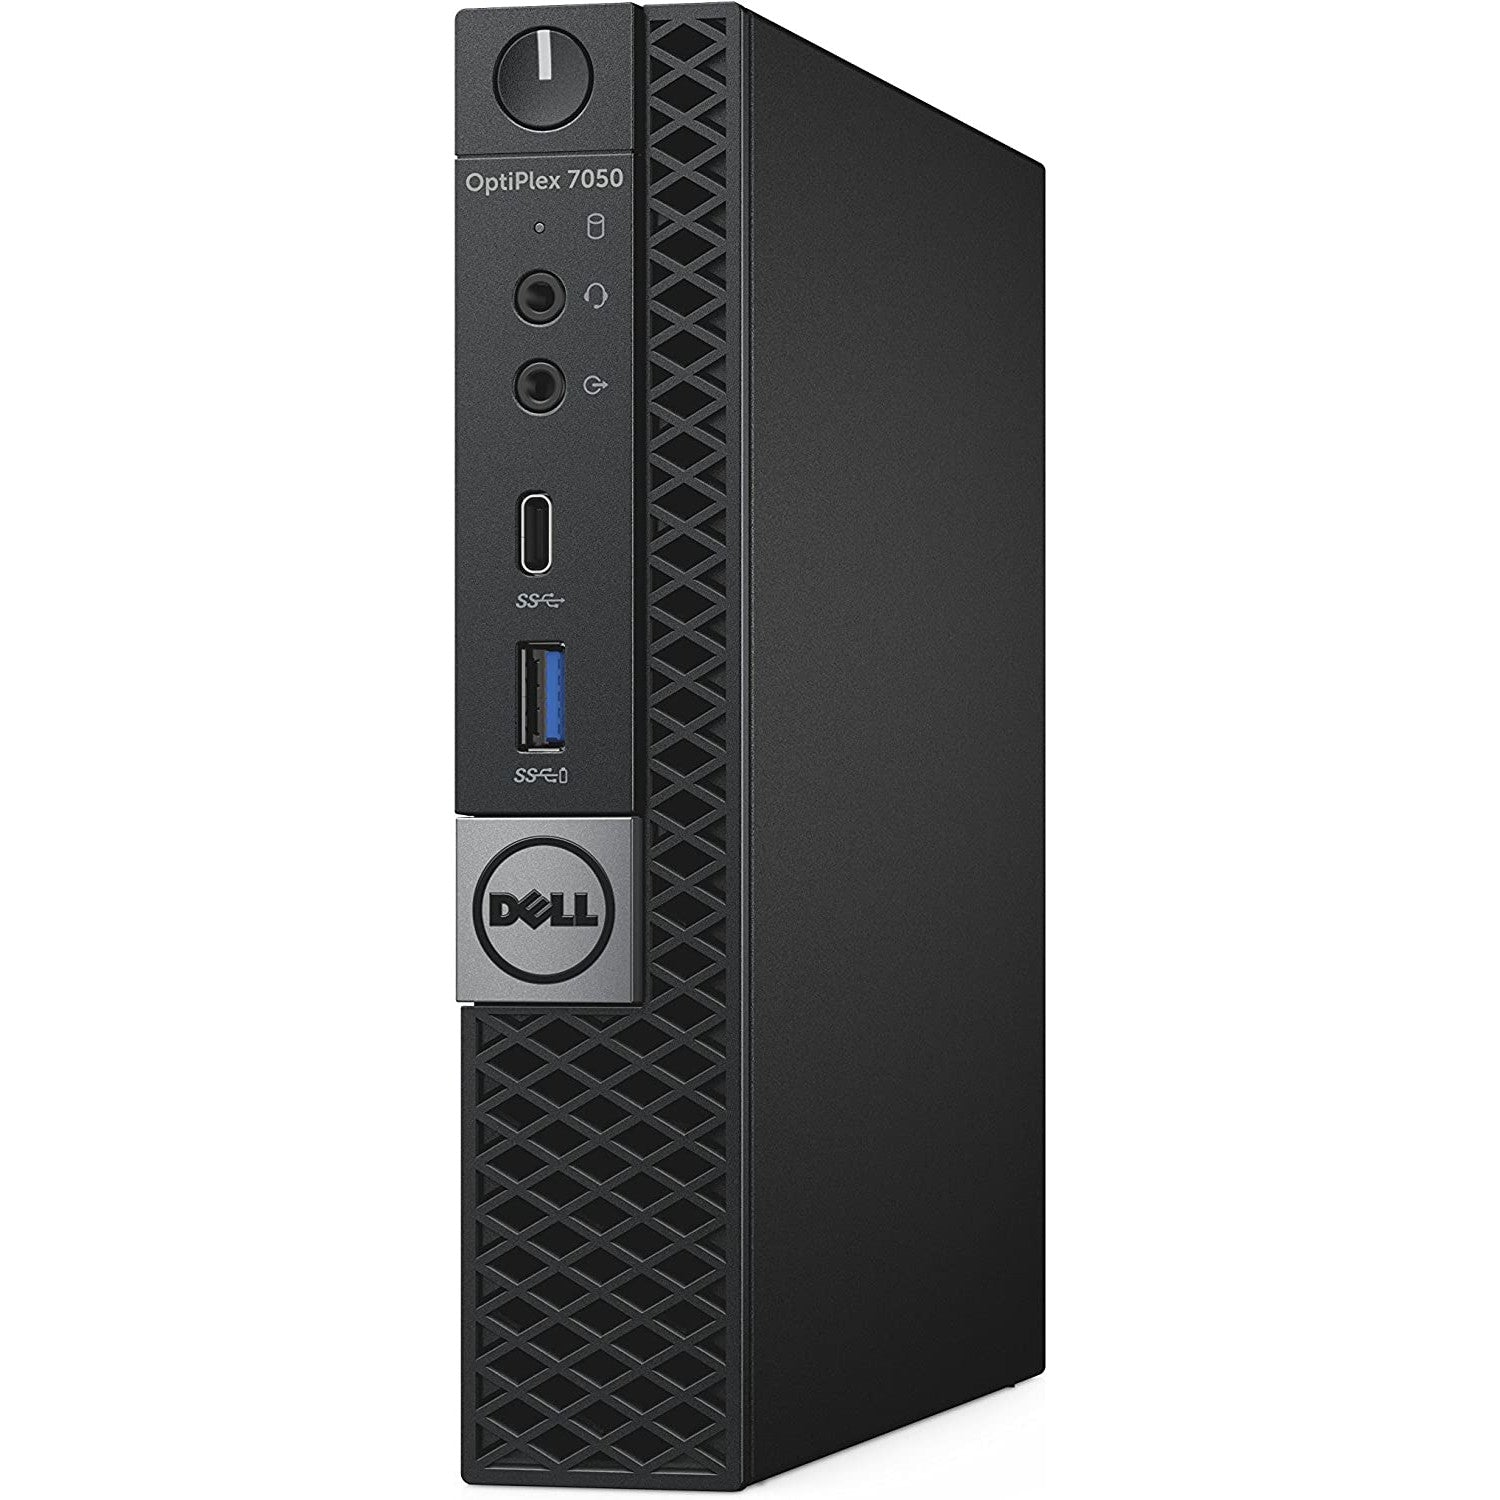 Discount PC - Front View  of Dell OptiPlex 7050 Small Form Factor Desktop.